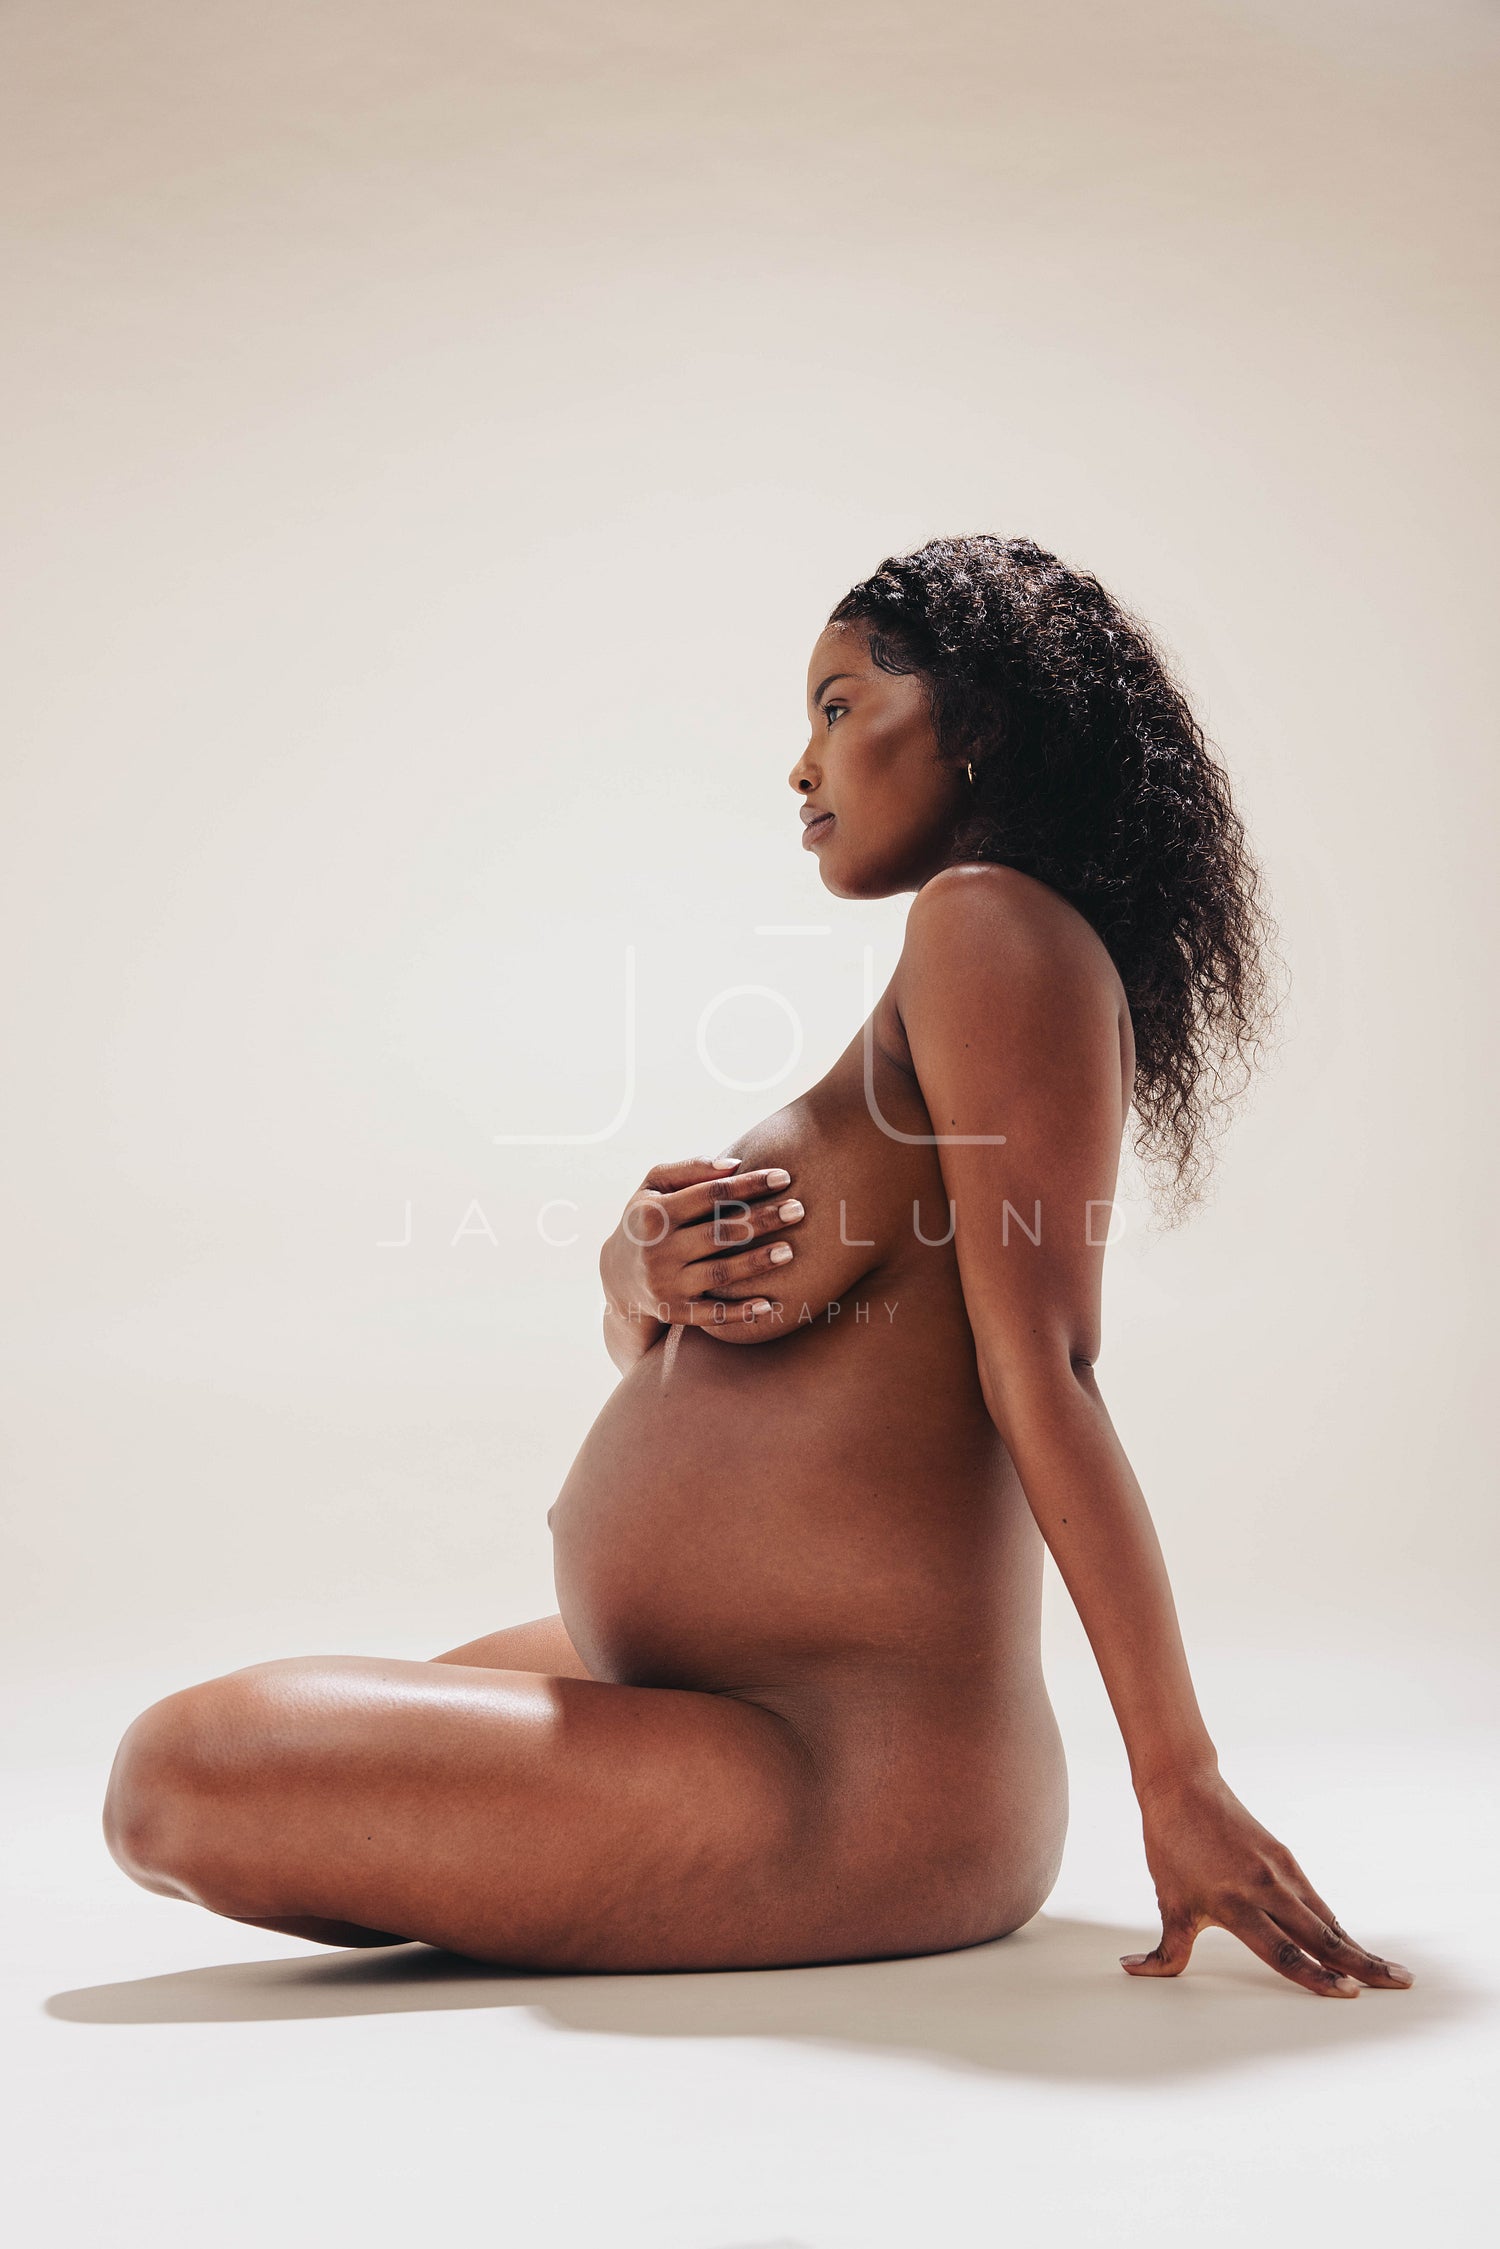 Naked, dark-skinned pregnant woman embracing her maternity body in